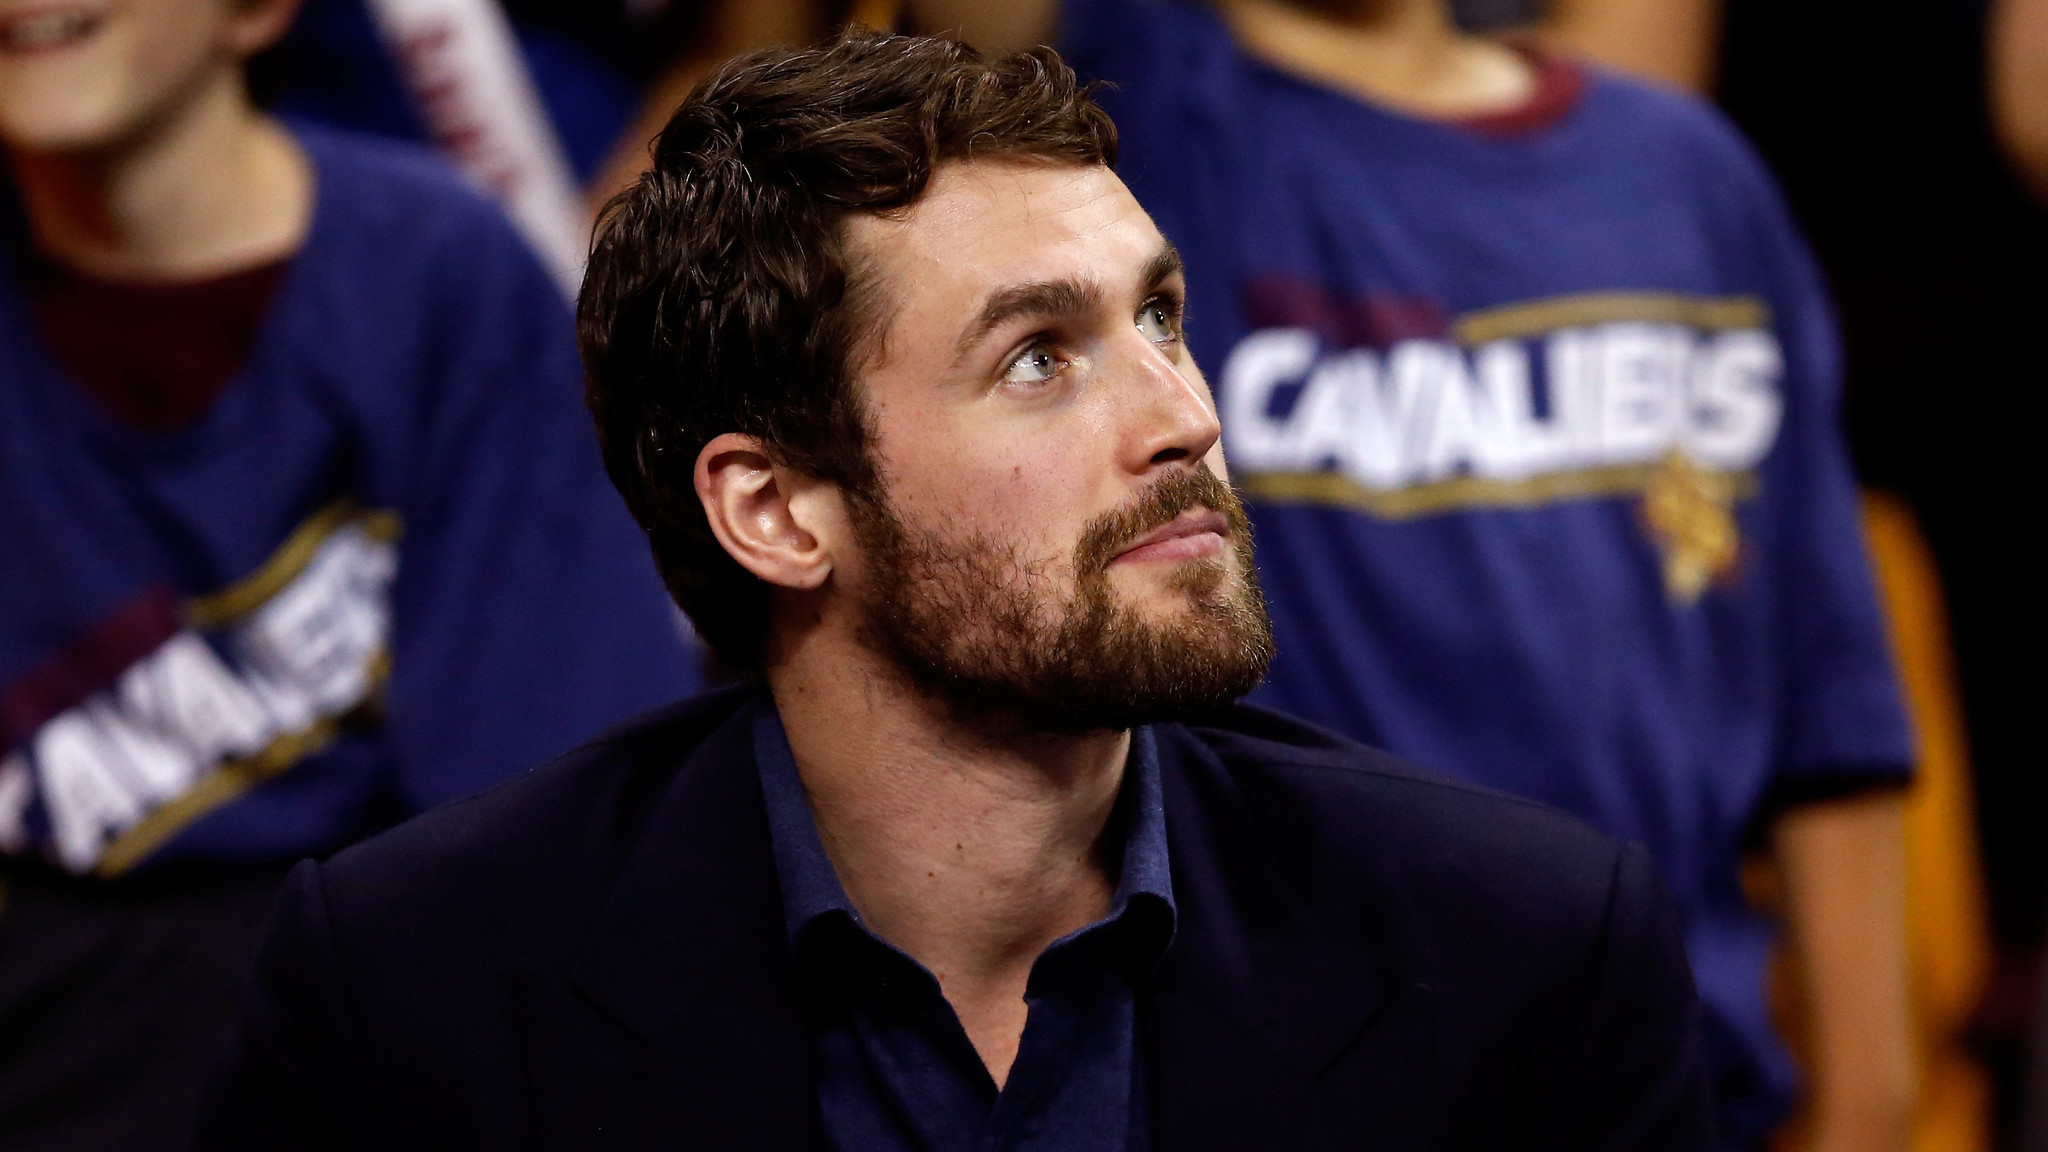 Kevin Love announces he will return to Cleveland Cavaliers - LA Times2048 x 1152